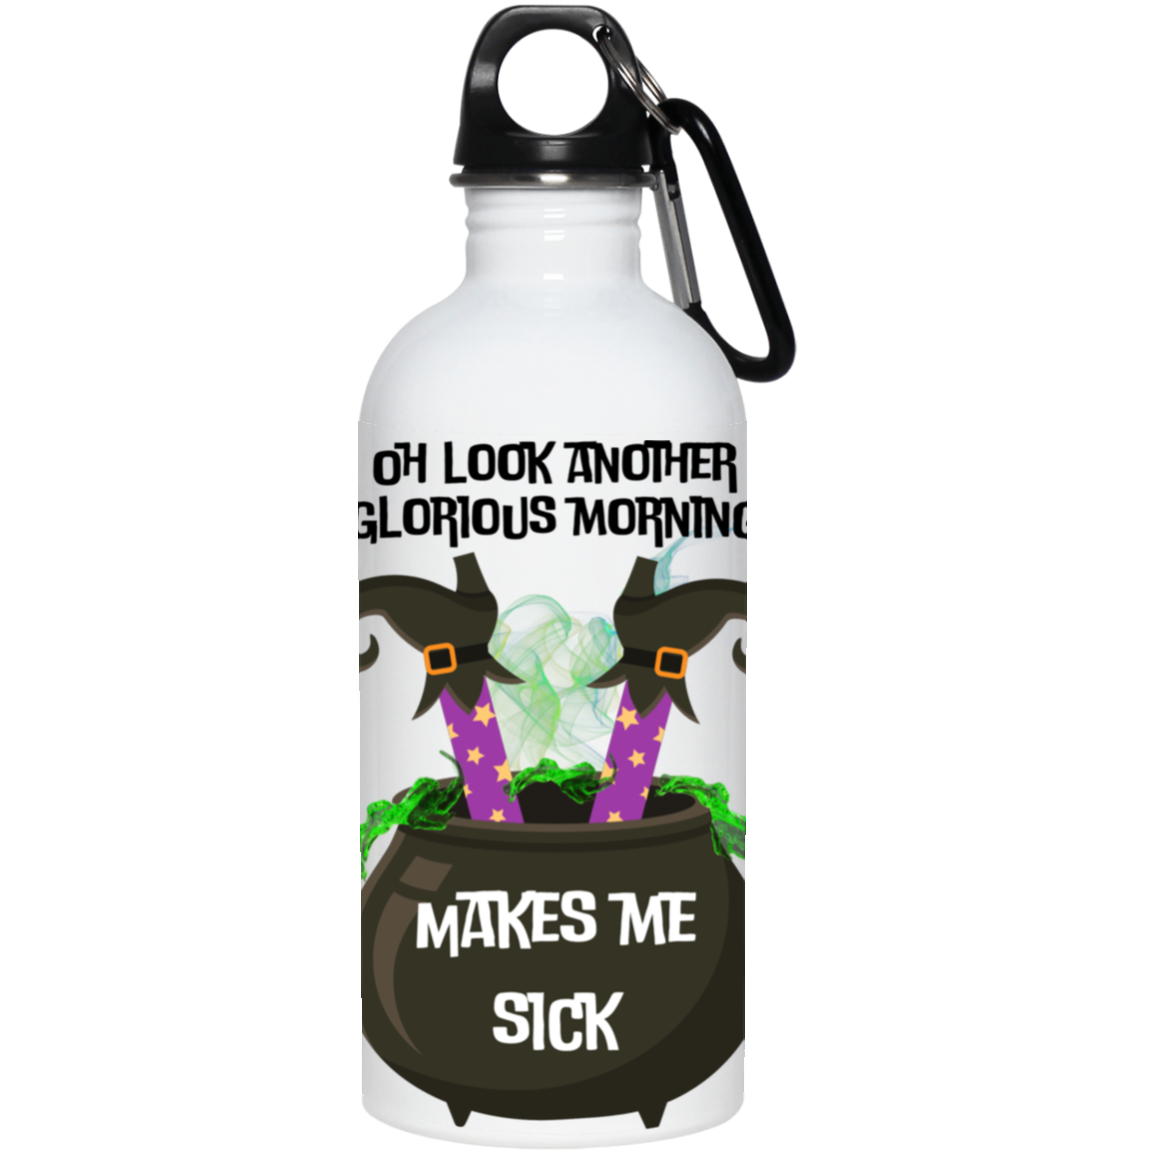 GLORIOUS MORNING 20 oz. Stainless Steel Water Bottle